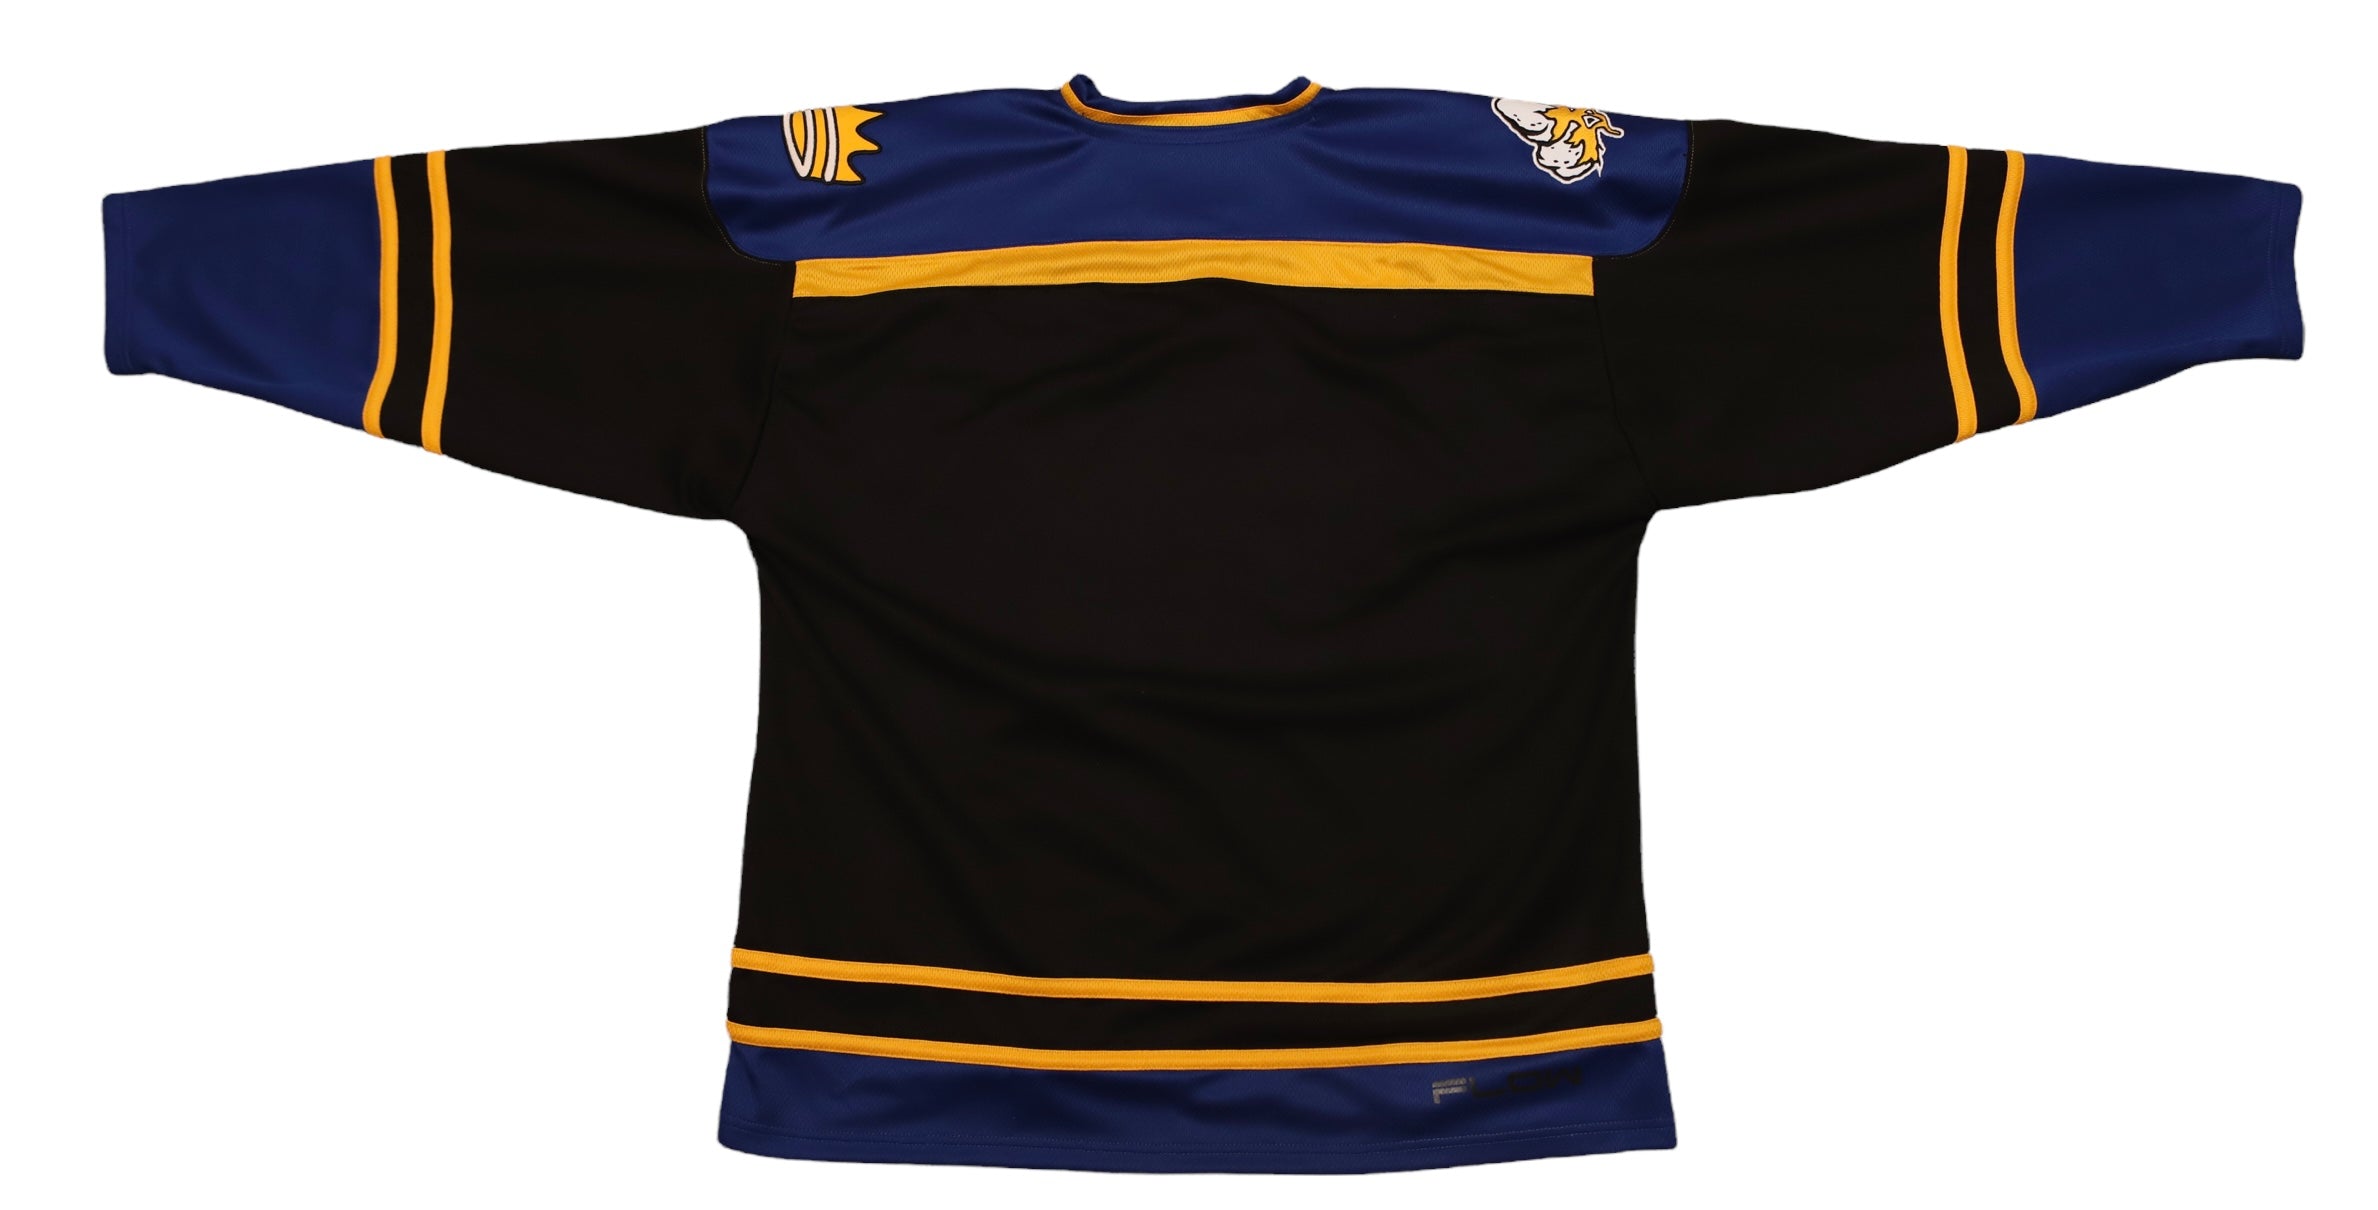 Youth Lubbock Cotton Kings Official Black Hockey Jersey in Black, Size: L, Sold by Red Raider Outfitters